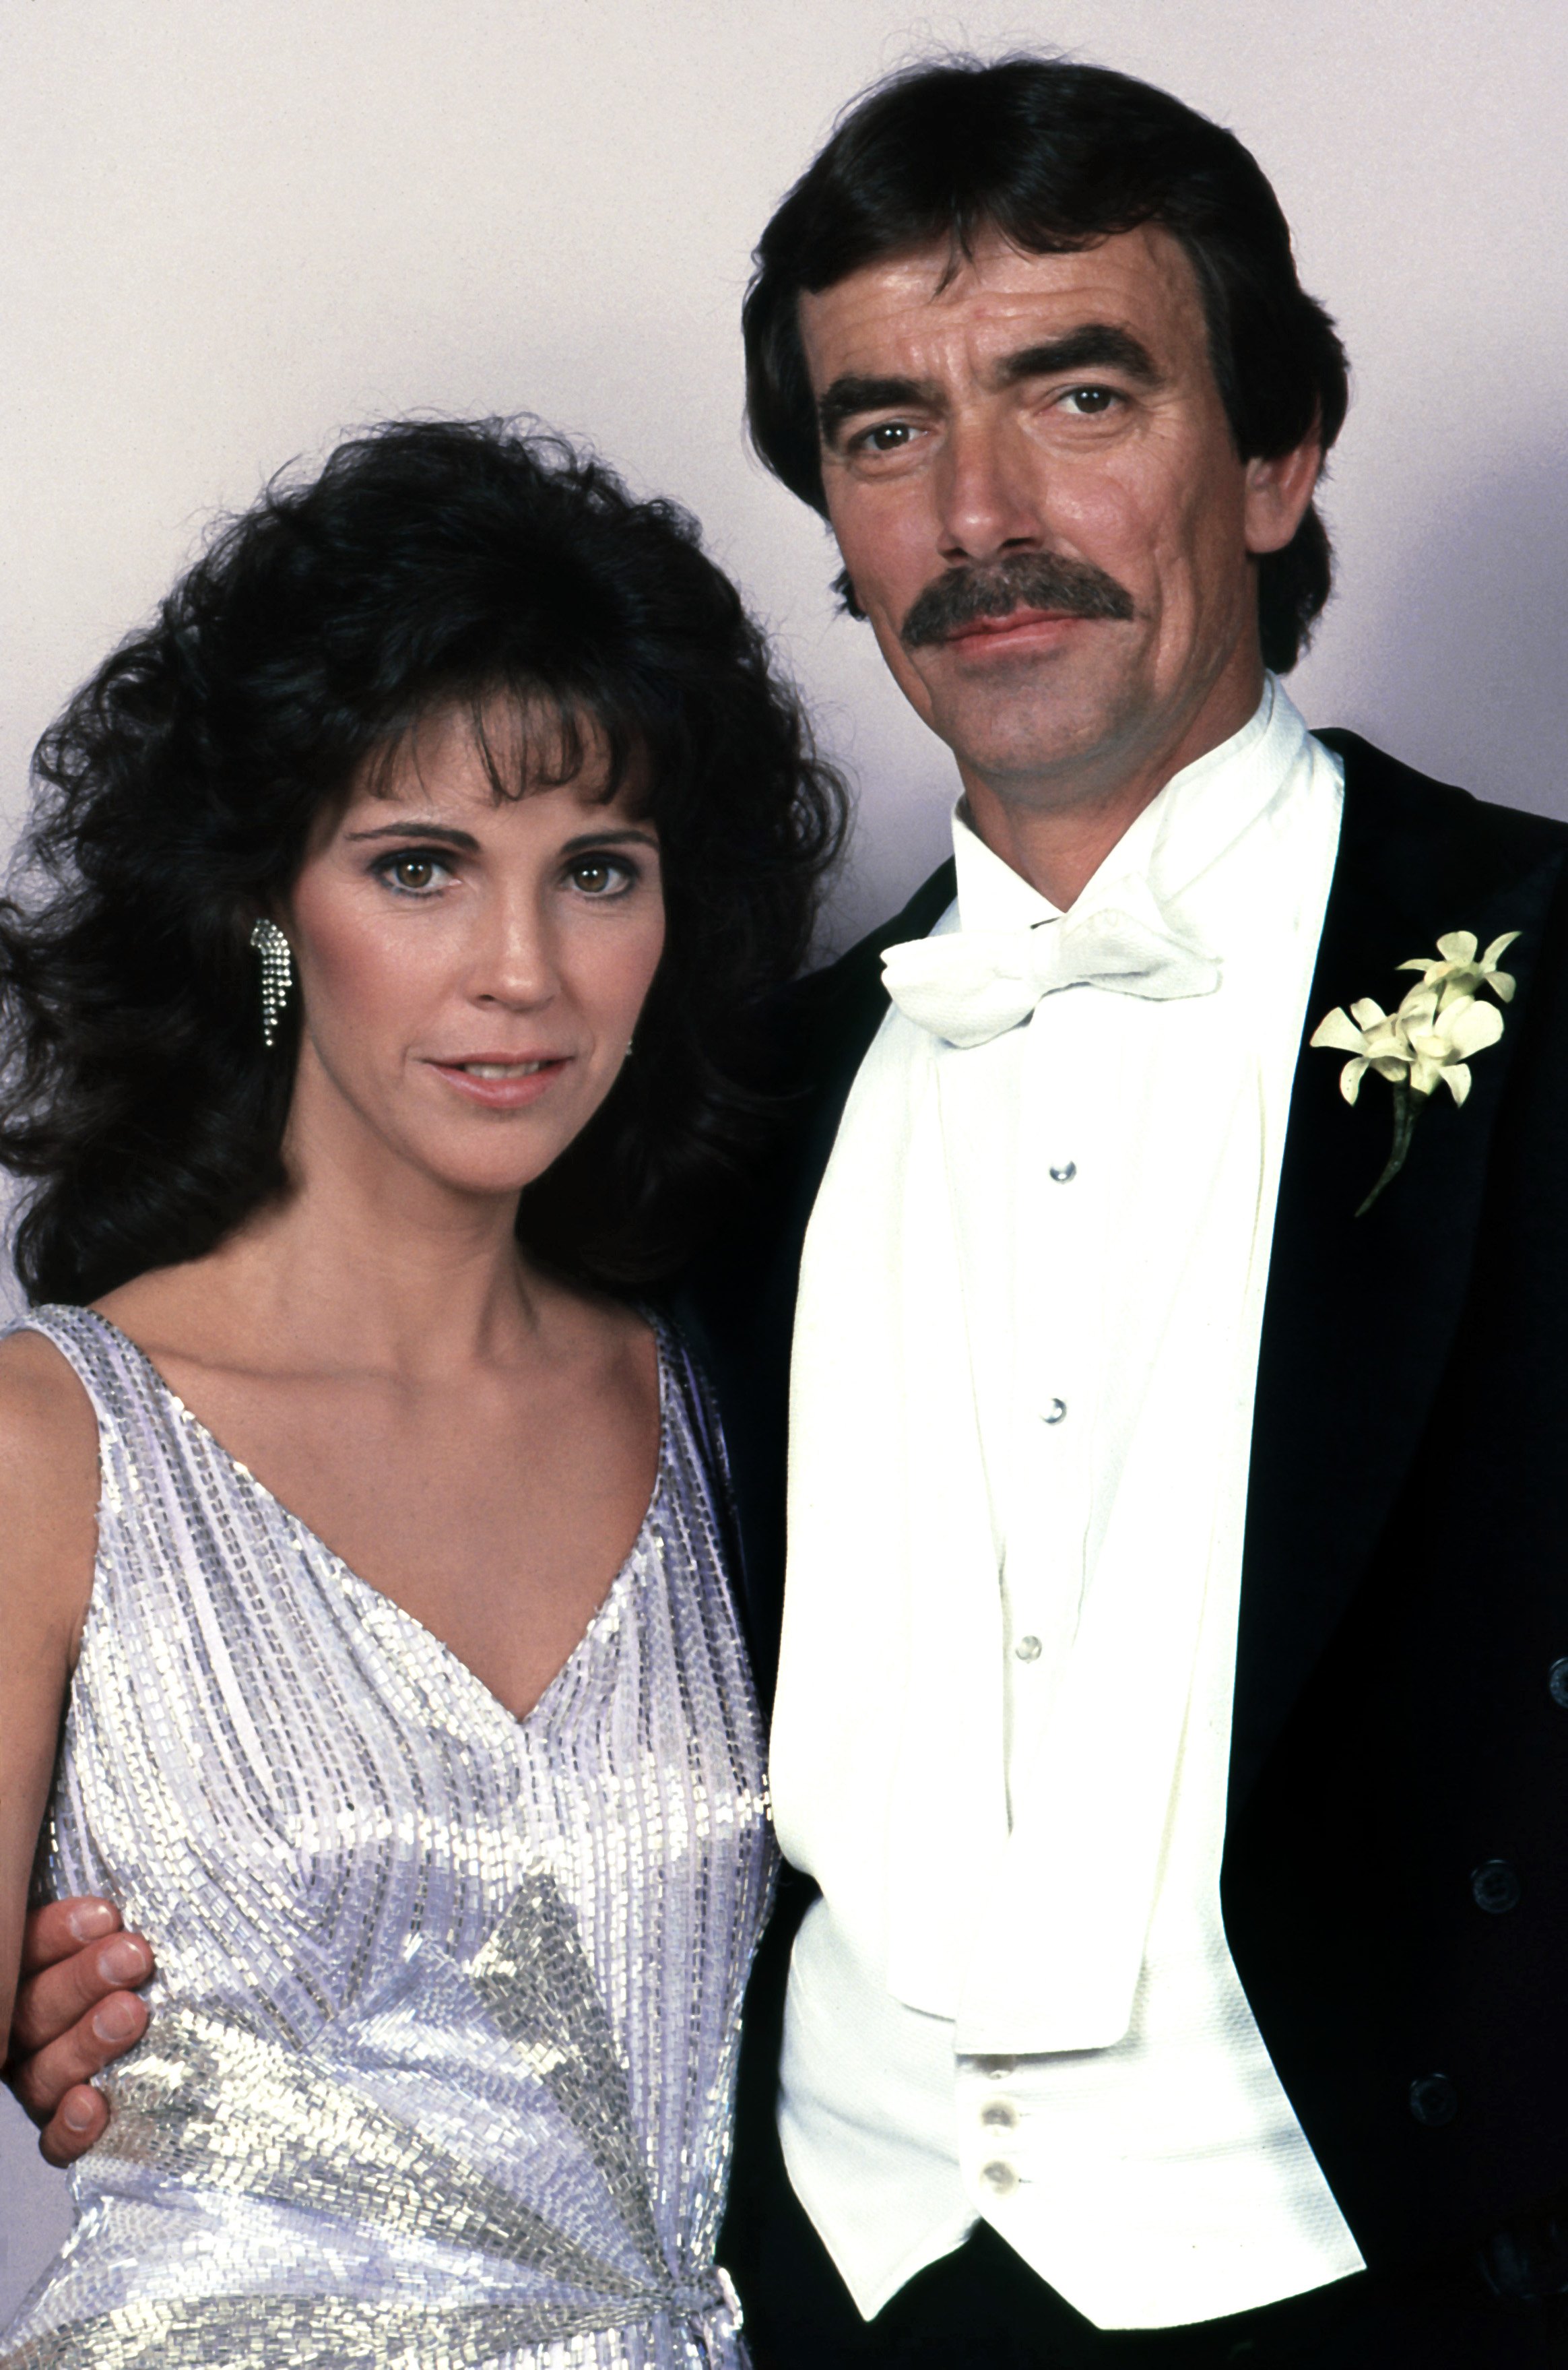 Eric Braeden and Meg Bennett pose for a portrait in 1992 in Los Angeles, California | Source: Getty Images